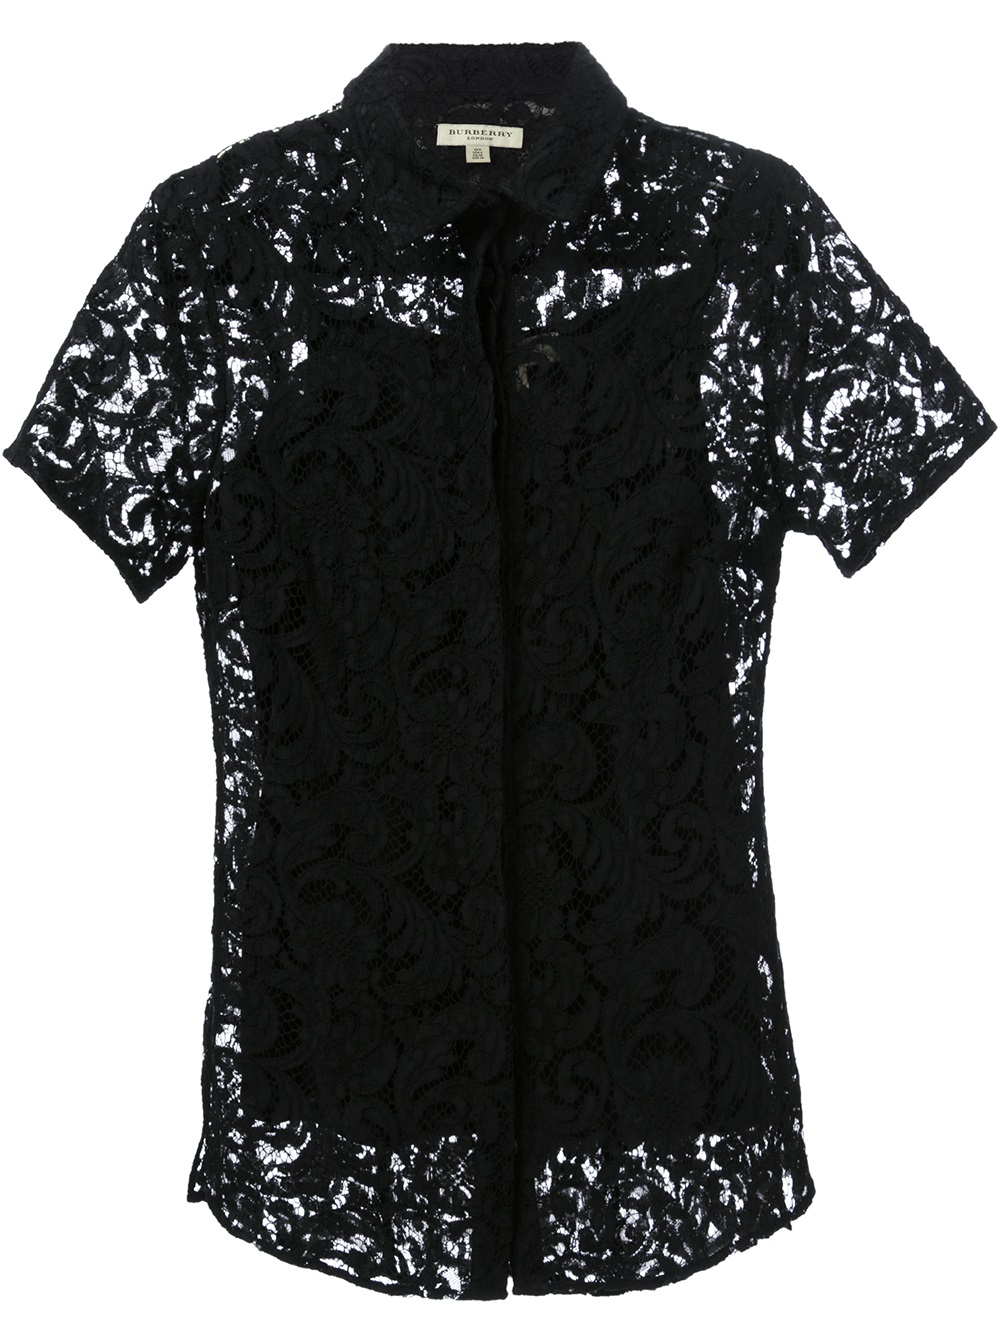 Lyst - Burberry Lace Shirt in Black